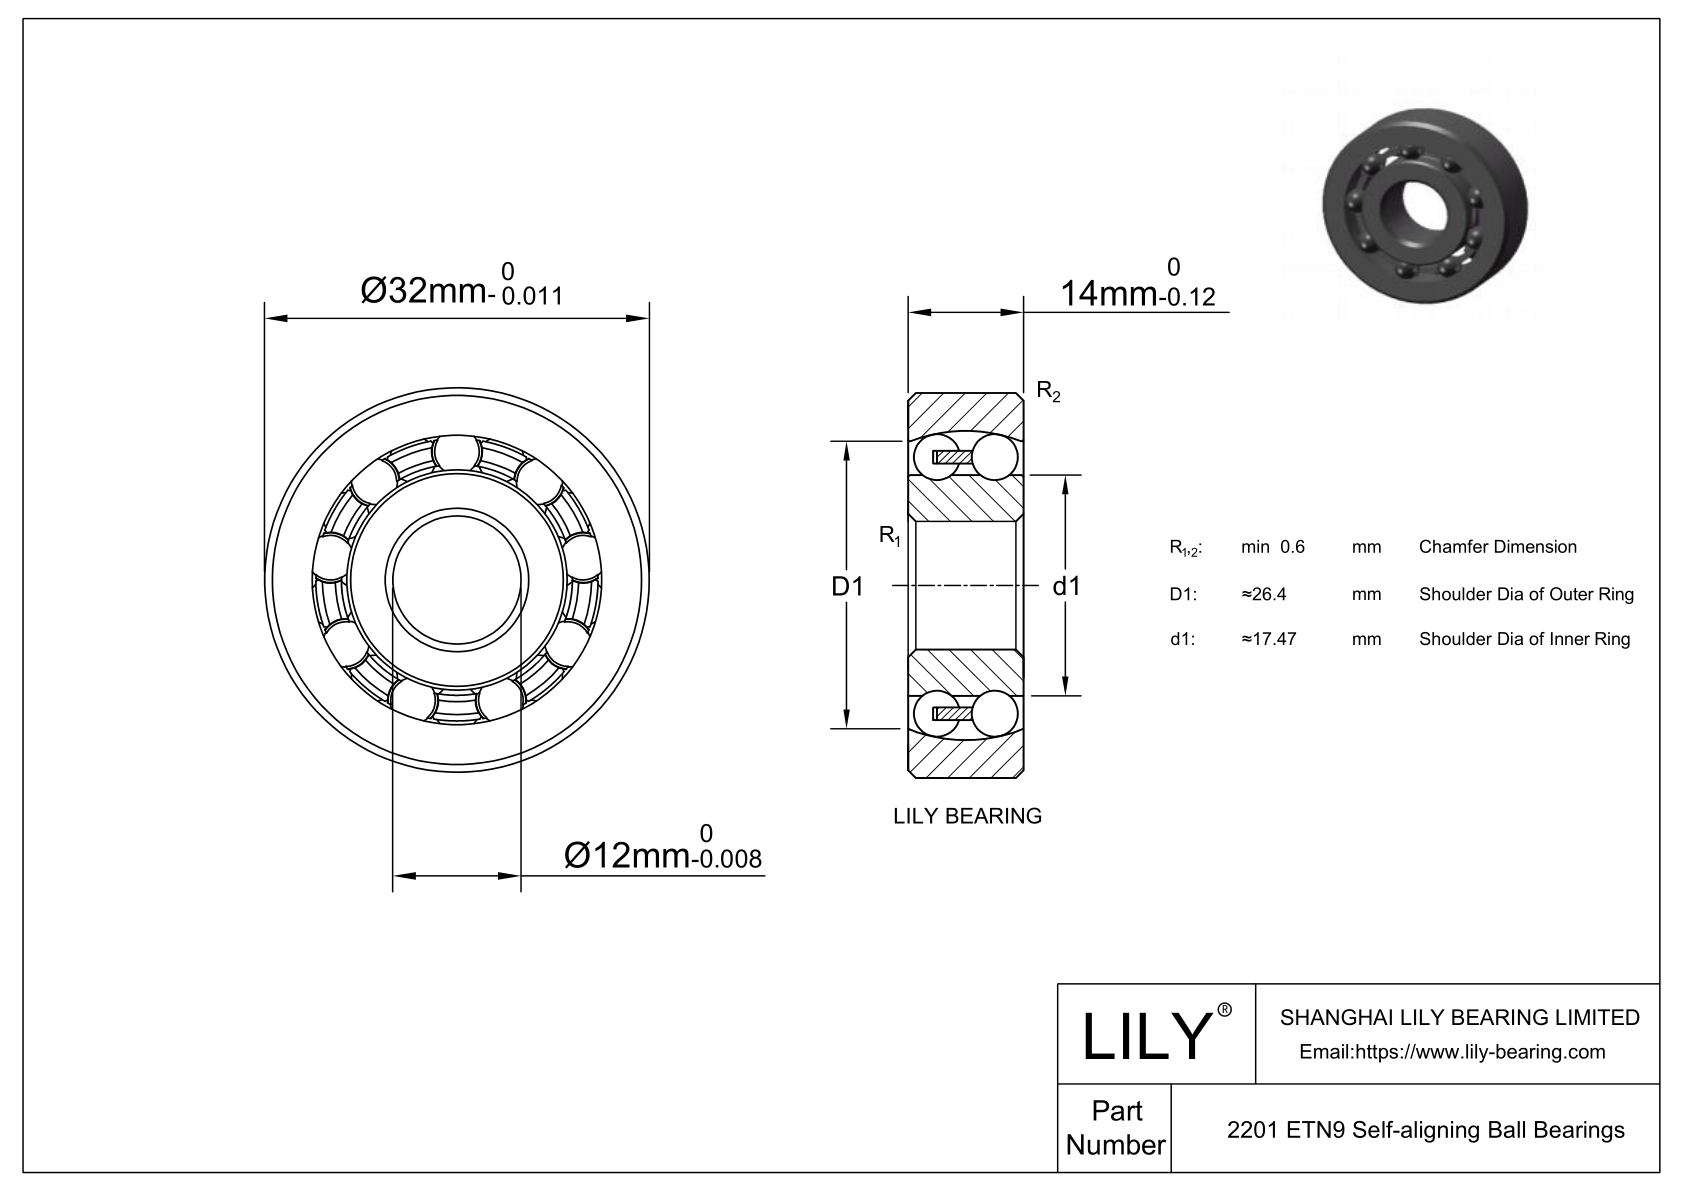 S2201 ETN9 Stainless Steel Self Aligning Ball Bearings cad drawing